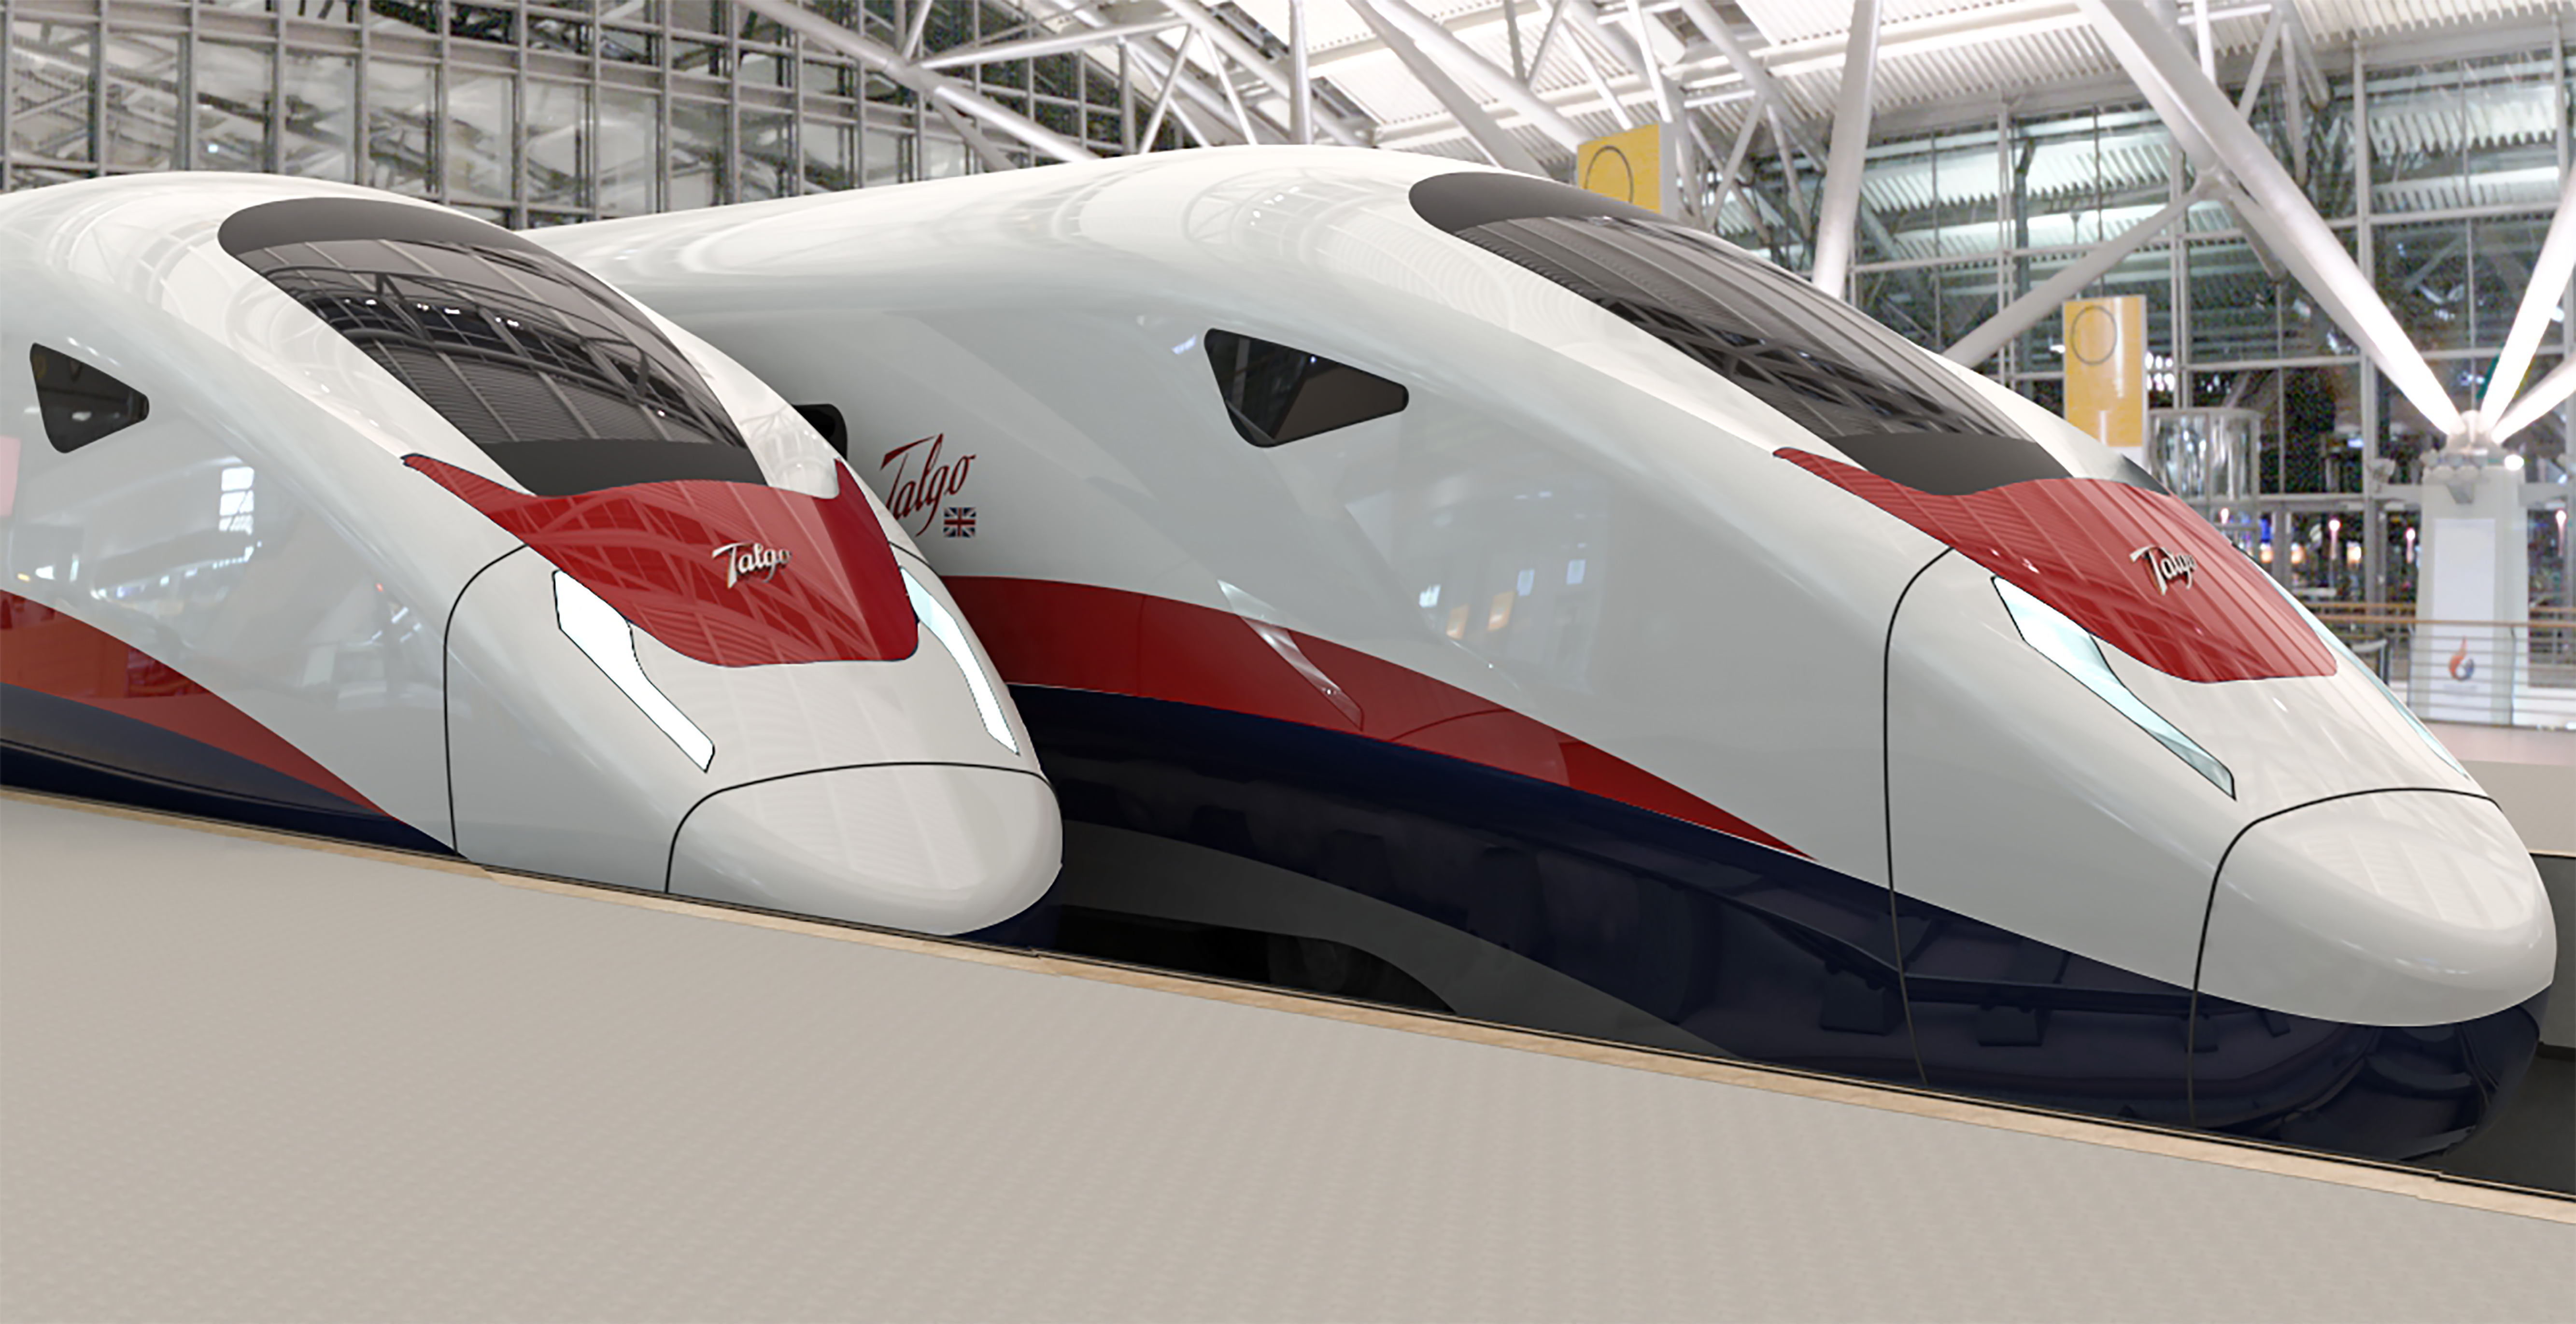 Talgo has selected Longannet for its factory site.